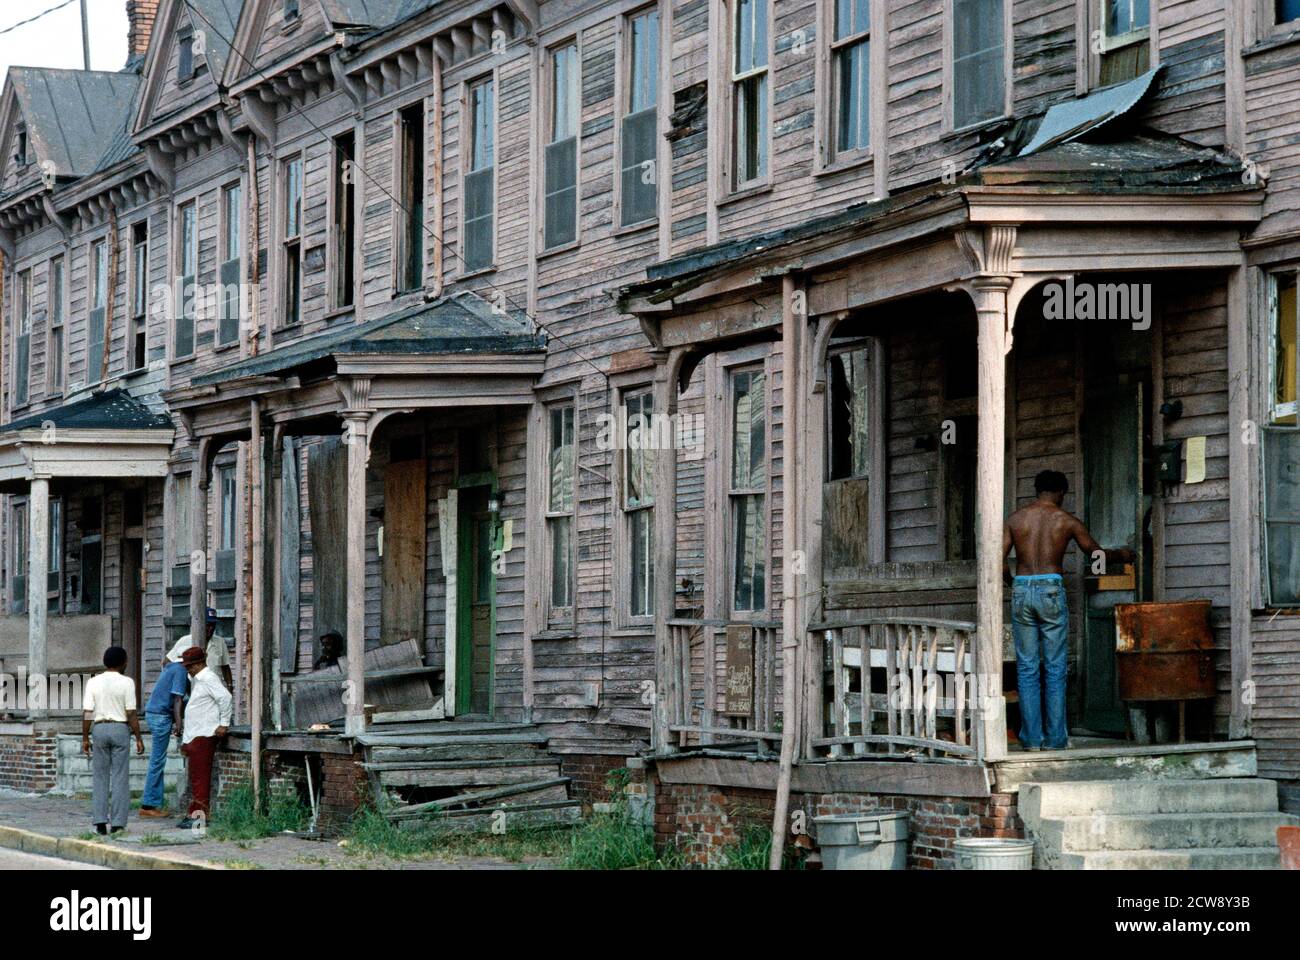 WOODEN CLAPBOARD HOUSES IN DOWNTOWN SAVANNAH, GEORGIA, USA, 1980s Stock Photo